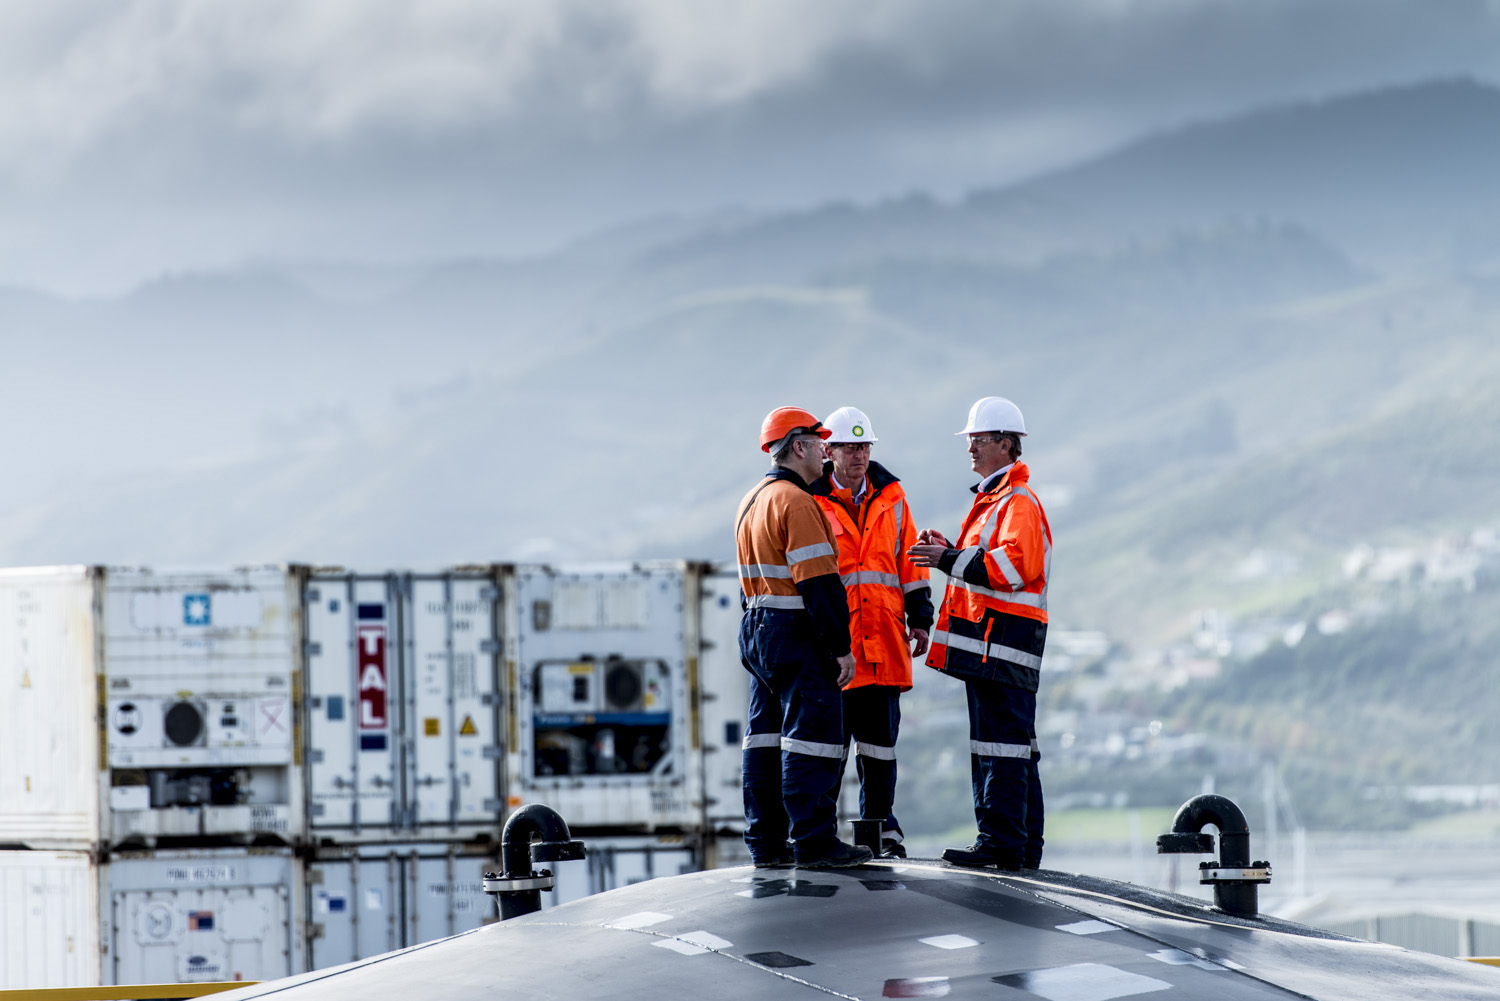 image of AARONTAIT COPYRIGHTED 2014 293 DOCUMENTARY PHOTOGRAPHER NEW ZEALAND EDITORIAL REPORTAGE CUSTOMER ENVIRONMENTAL HUMAN RESOURCES INTERVIEW REAL NATURAL LIGHT OIL FUEL TANK FARM MEETING INSPECTION HEALTH